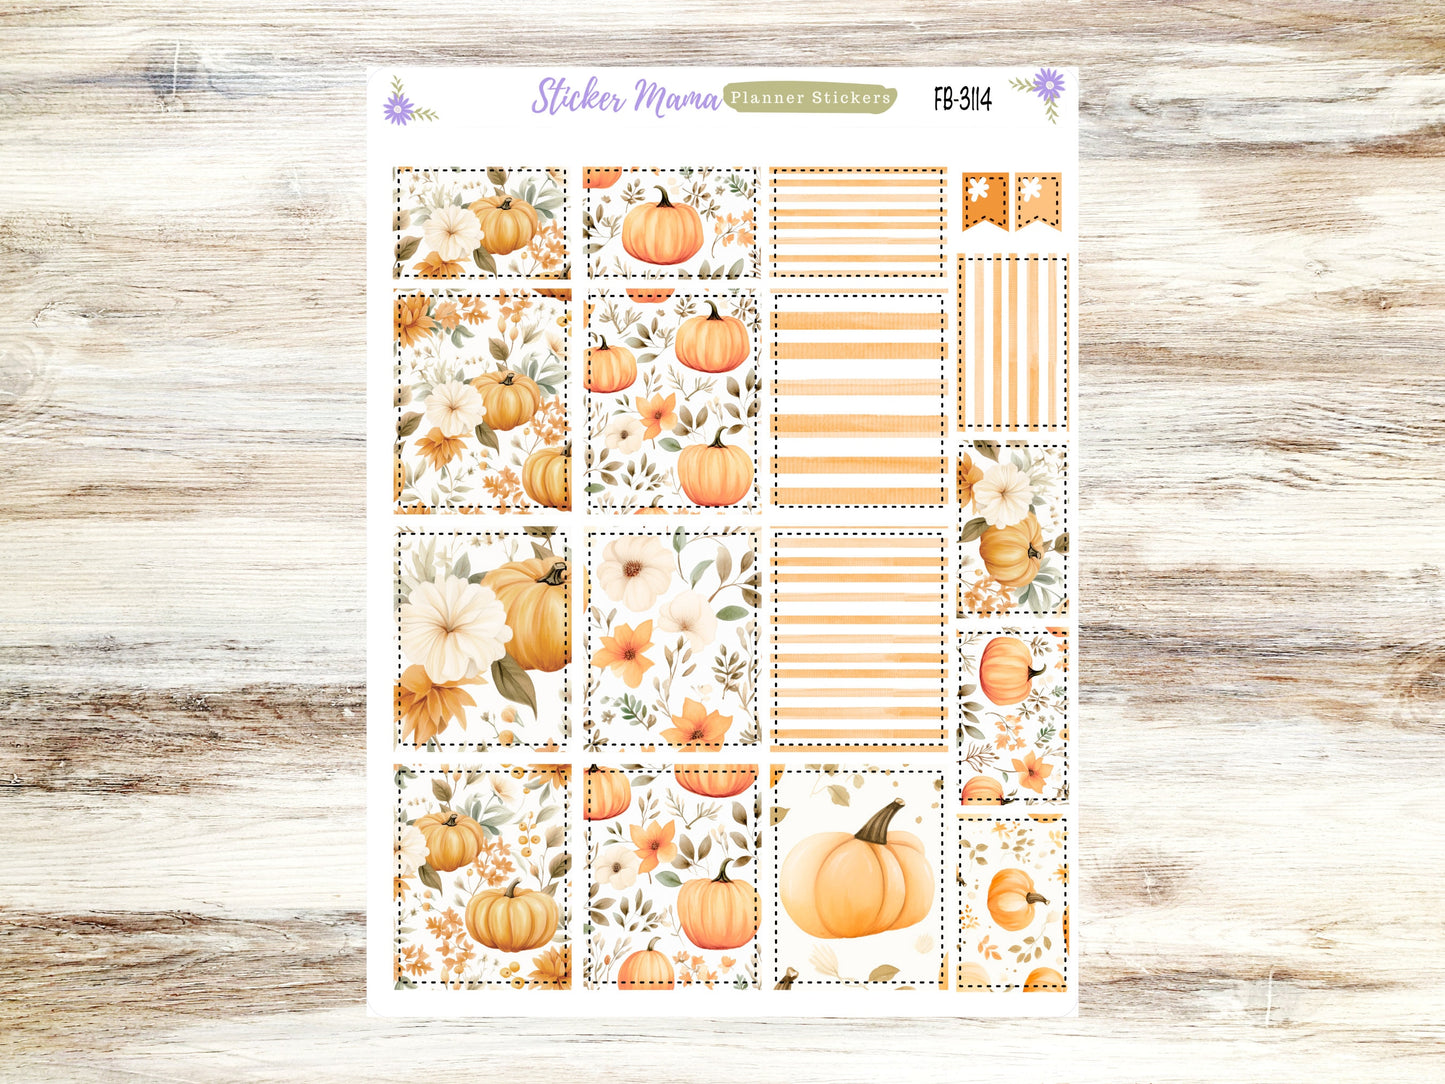 FULL BOXES-3114 || Paradise Pumpkin || Planner Stickers -|| Full Box for Planners